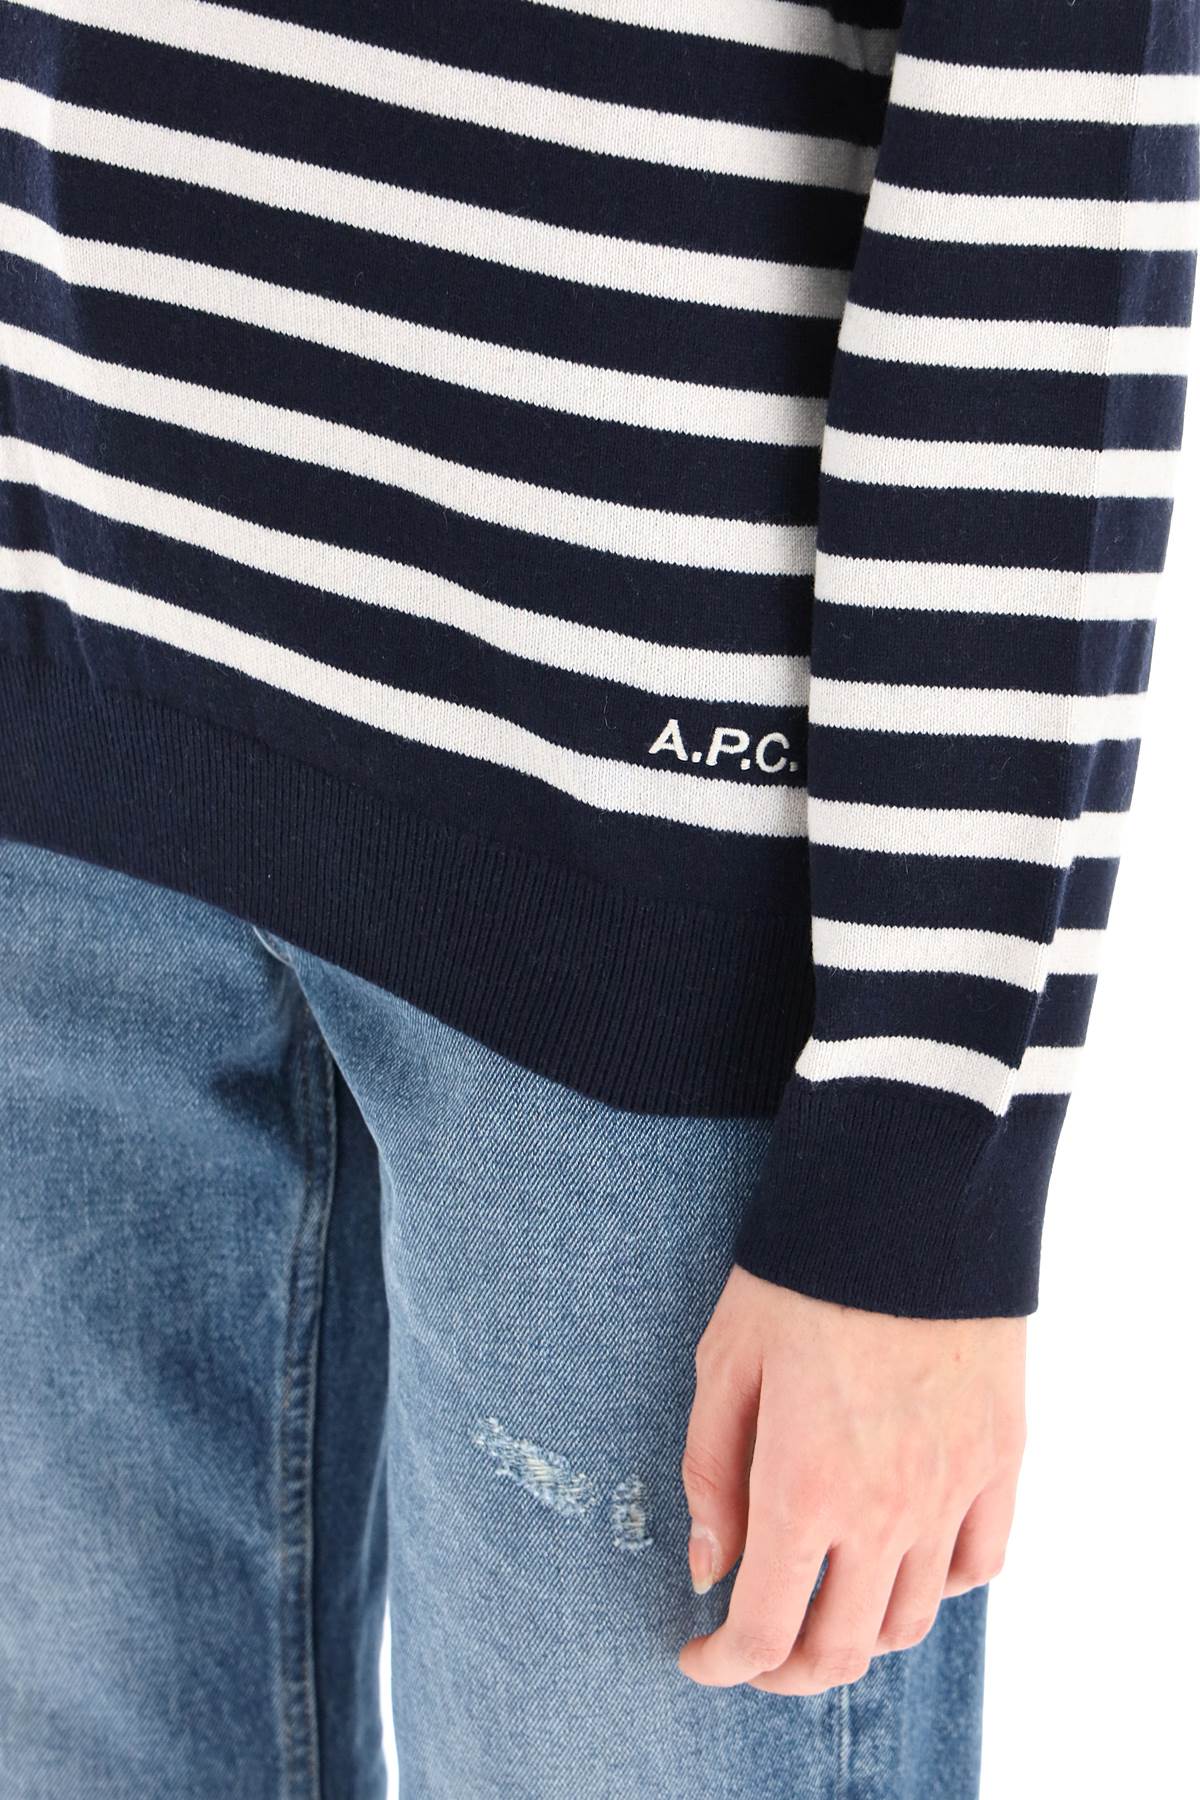 Shop Apc Phoebe Striped Cashmere And Cotton Sweater In Dark Navy (blue)